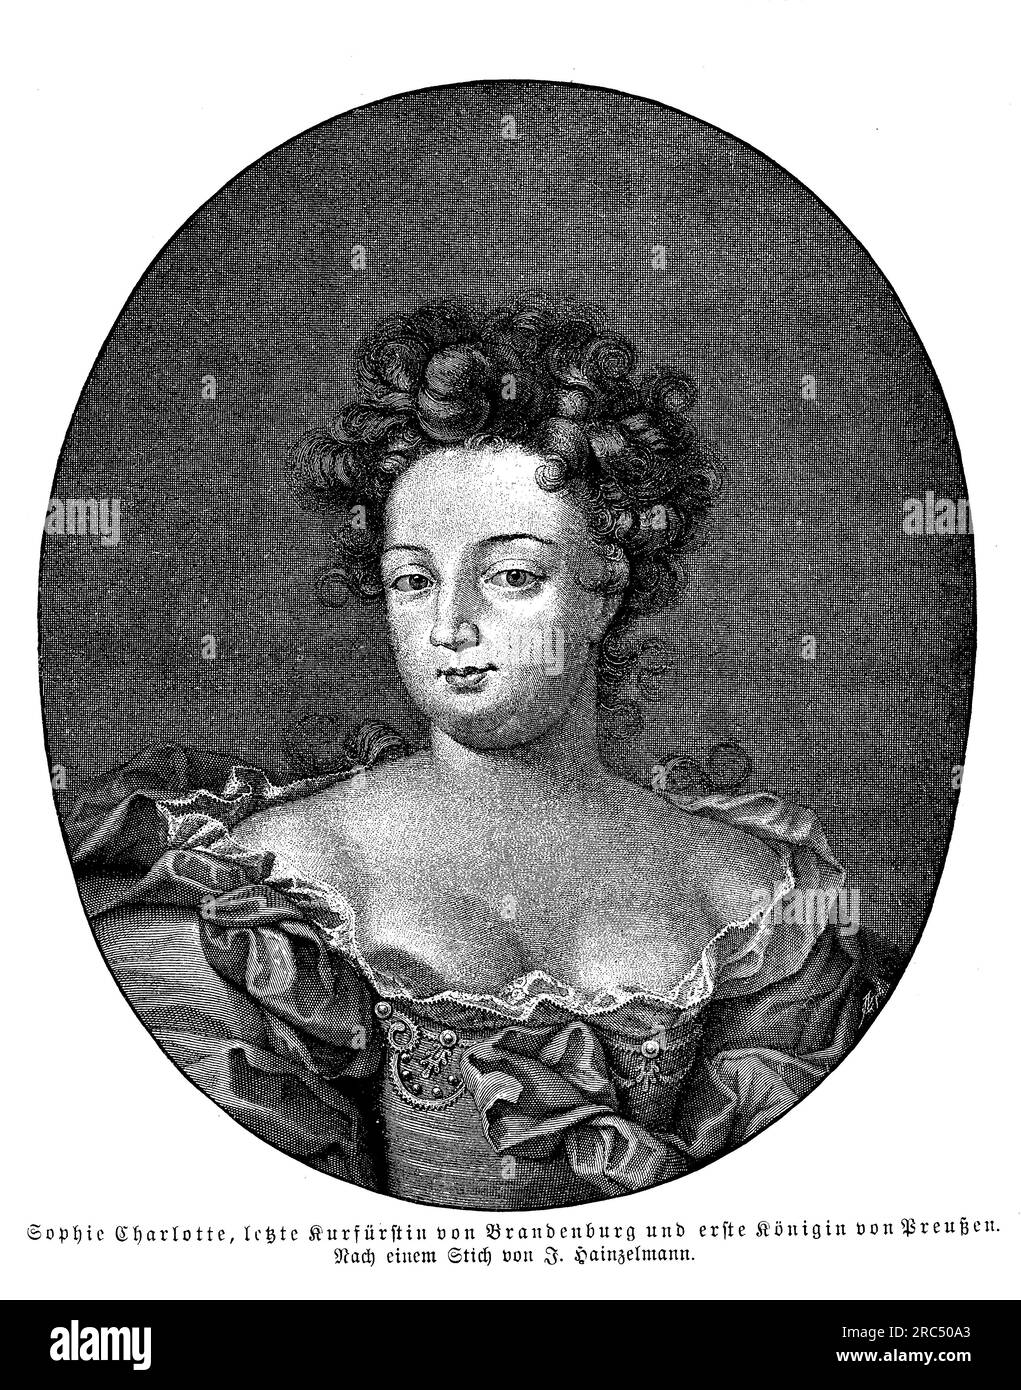 Portrait of Sophie Charlotte von Brandenburg  Prussian princess and the wife of King Frederick I of Prussia. She was born in 1668 and was the eldest daughter of Elector Frederick William of Brandenburg. Sophie Charlotte was known for her beauty, intelligence, and cultural interests, and she played a significant role in the development of the arts and sciences in Prussia during her lifetime. She was a patron of the philosopher Gottfried Wilhelm Leibniz and was responsible for the establishment of the Academy of Sciences in Berlin. She was also a prolific letter writer Stock Photo